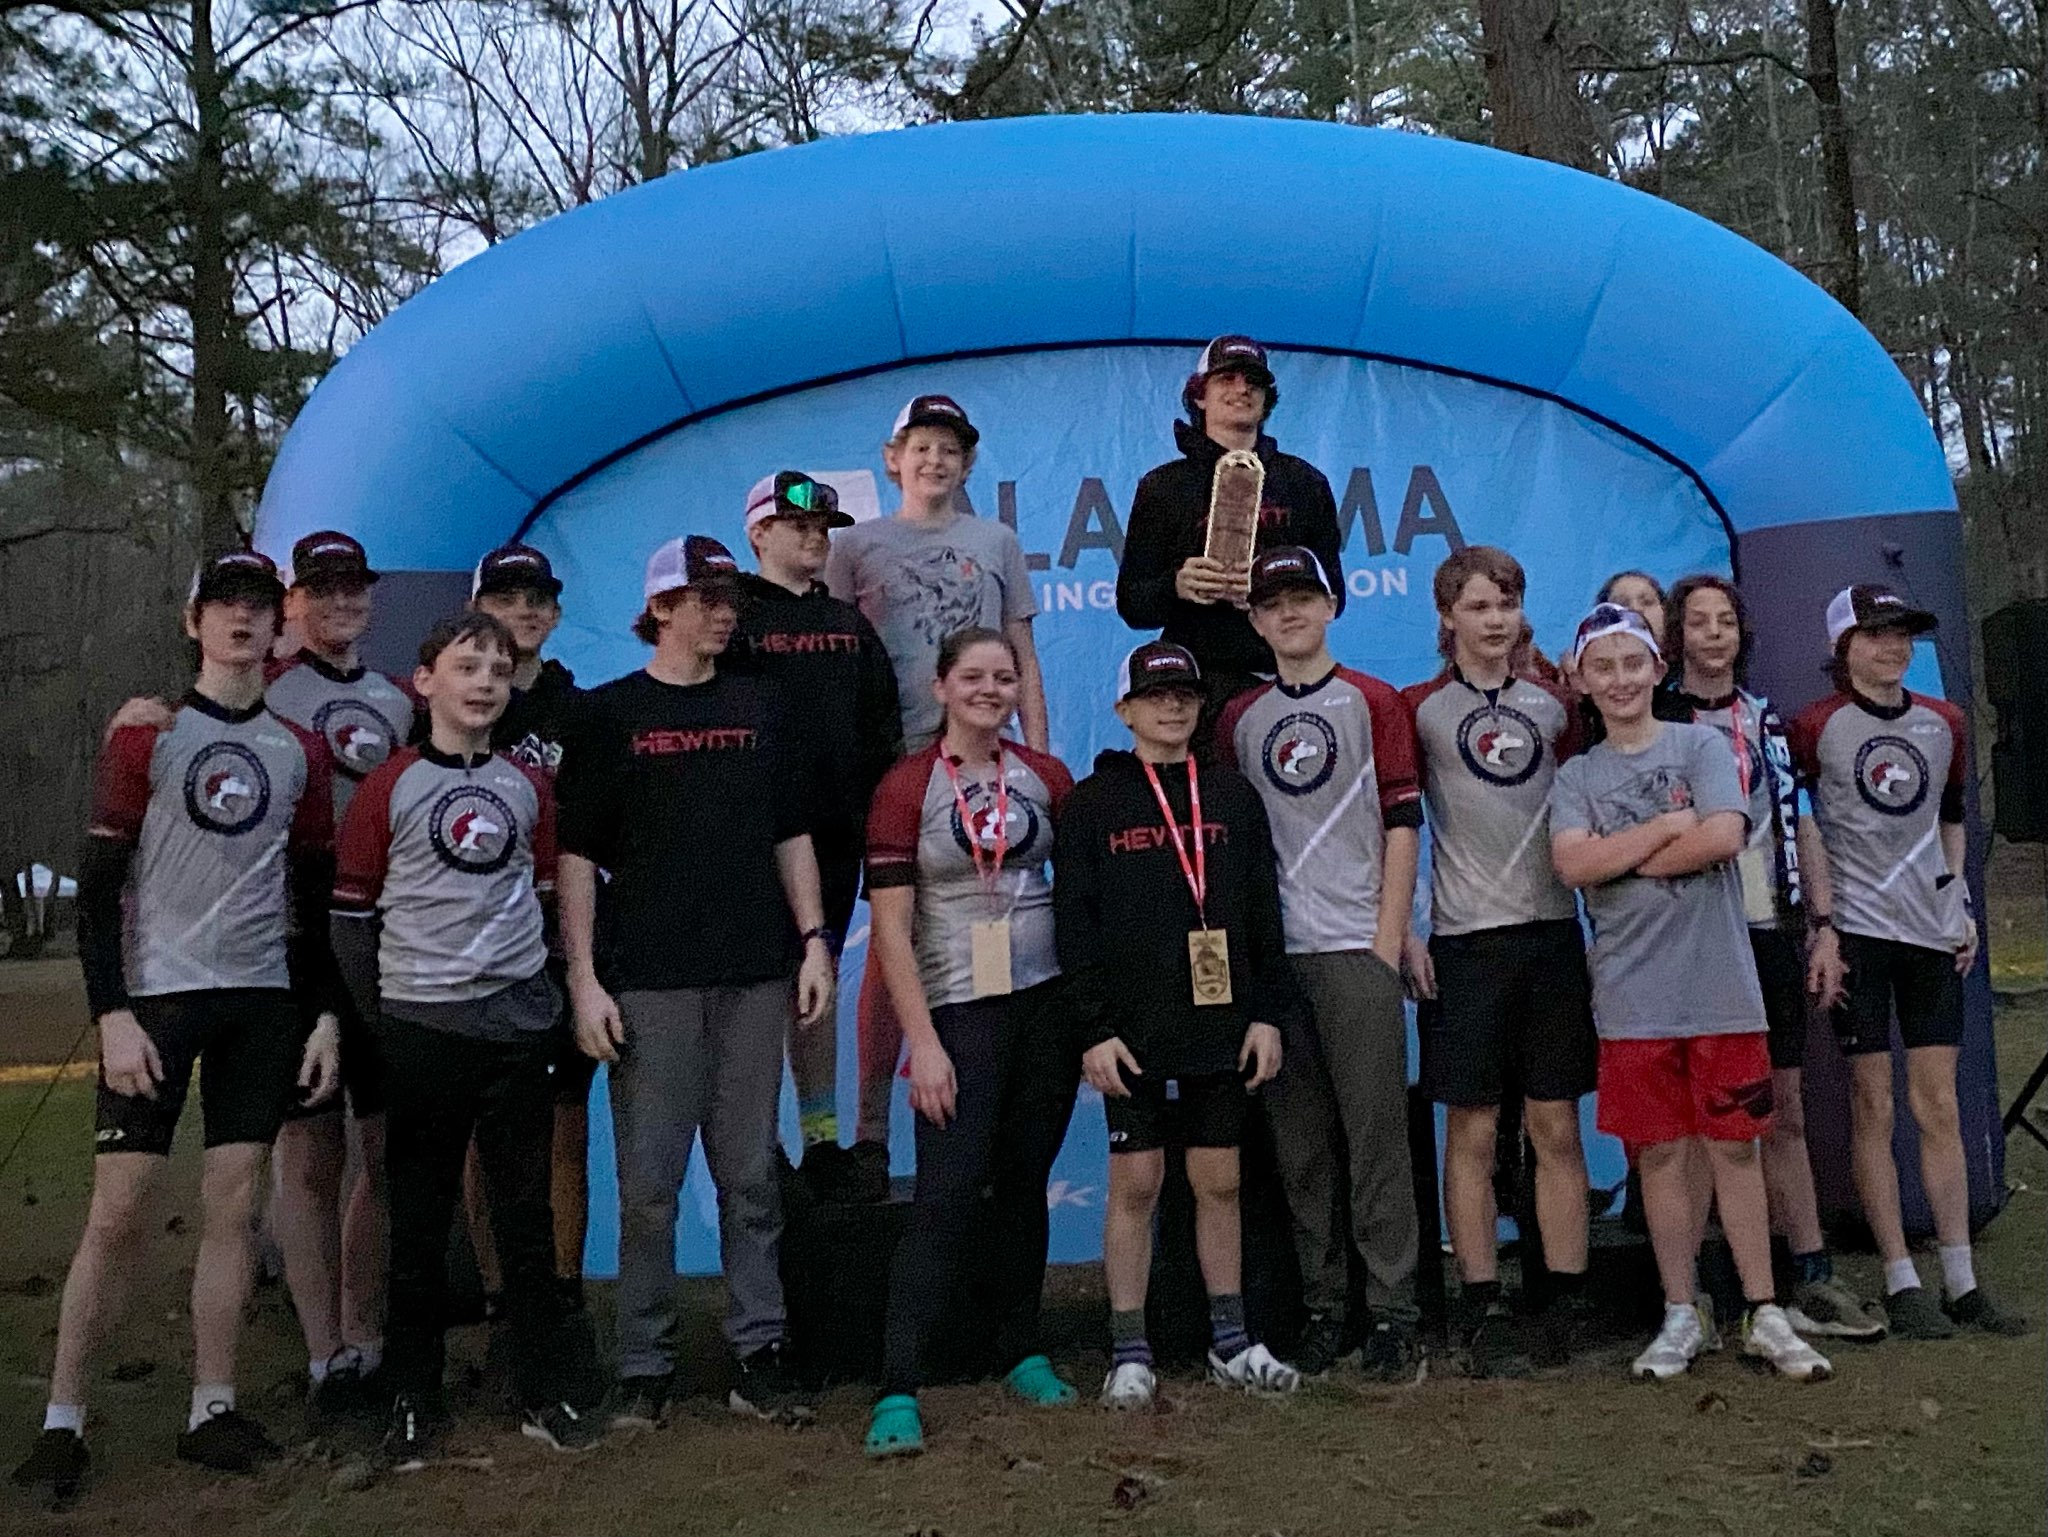 Hewitt-Trussville Mountain Bike team kicks off season with 1st, 2nd place finishes